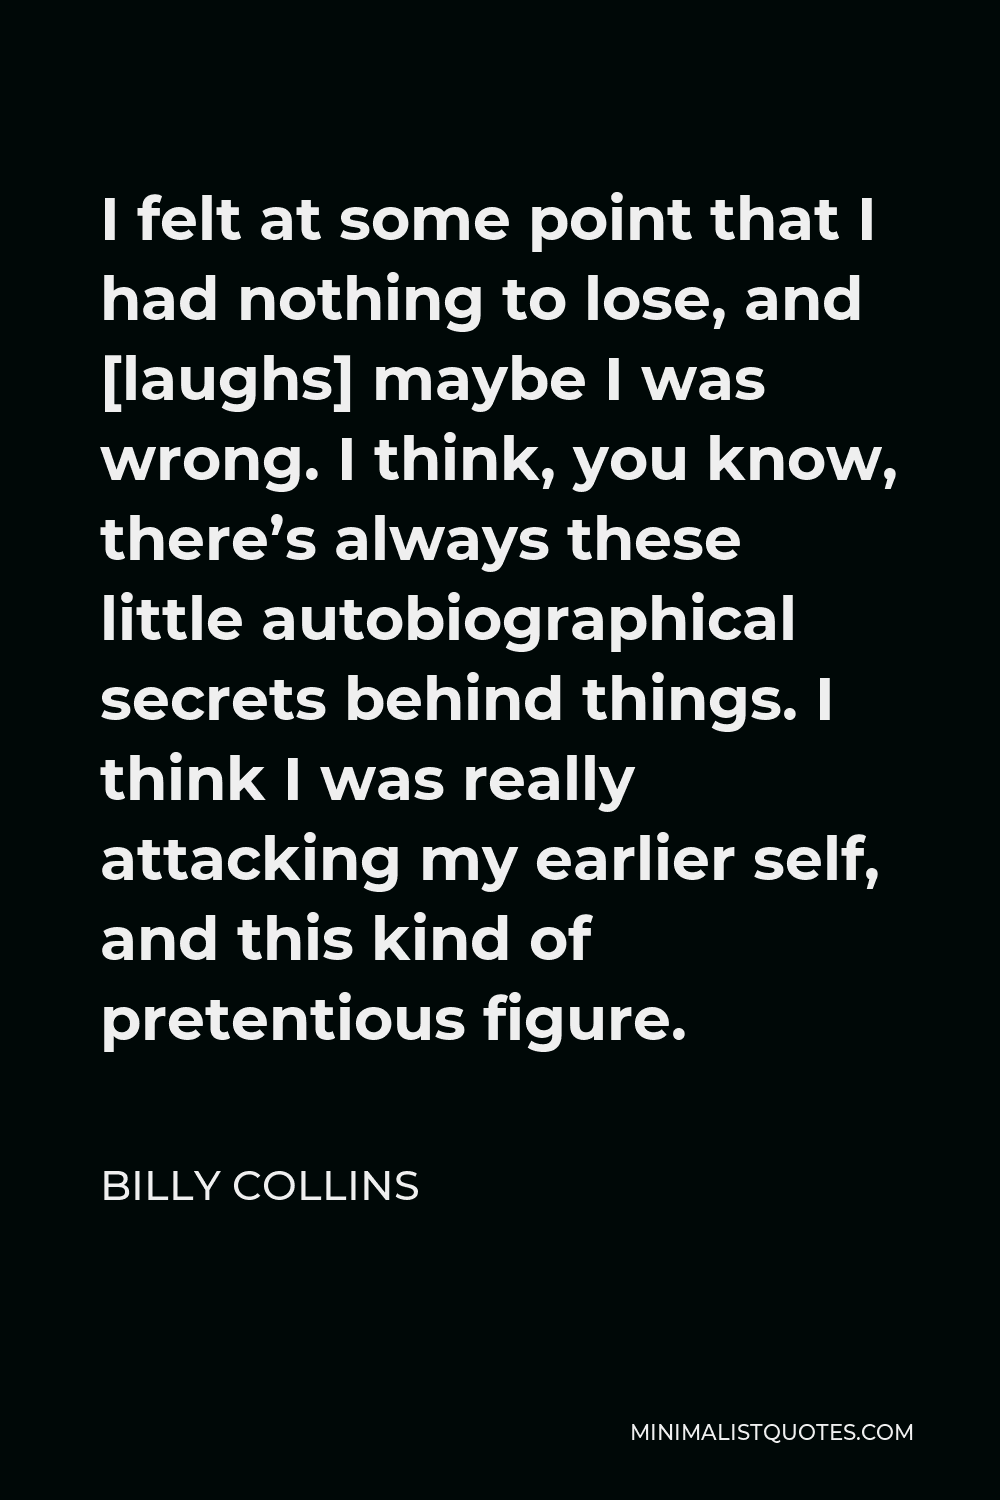 Billy Collins Quote - I felt at some point that I had nothing to lose, and [laughs] maybe I was wrong. I think, you know, there’s always these little autobiographical secrets behind things. I think I was really attacking my earlier self, and this kind of pretentious figure.